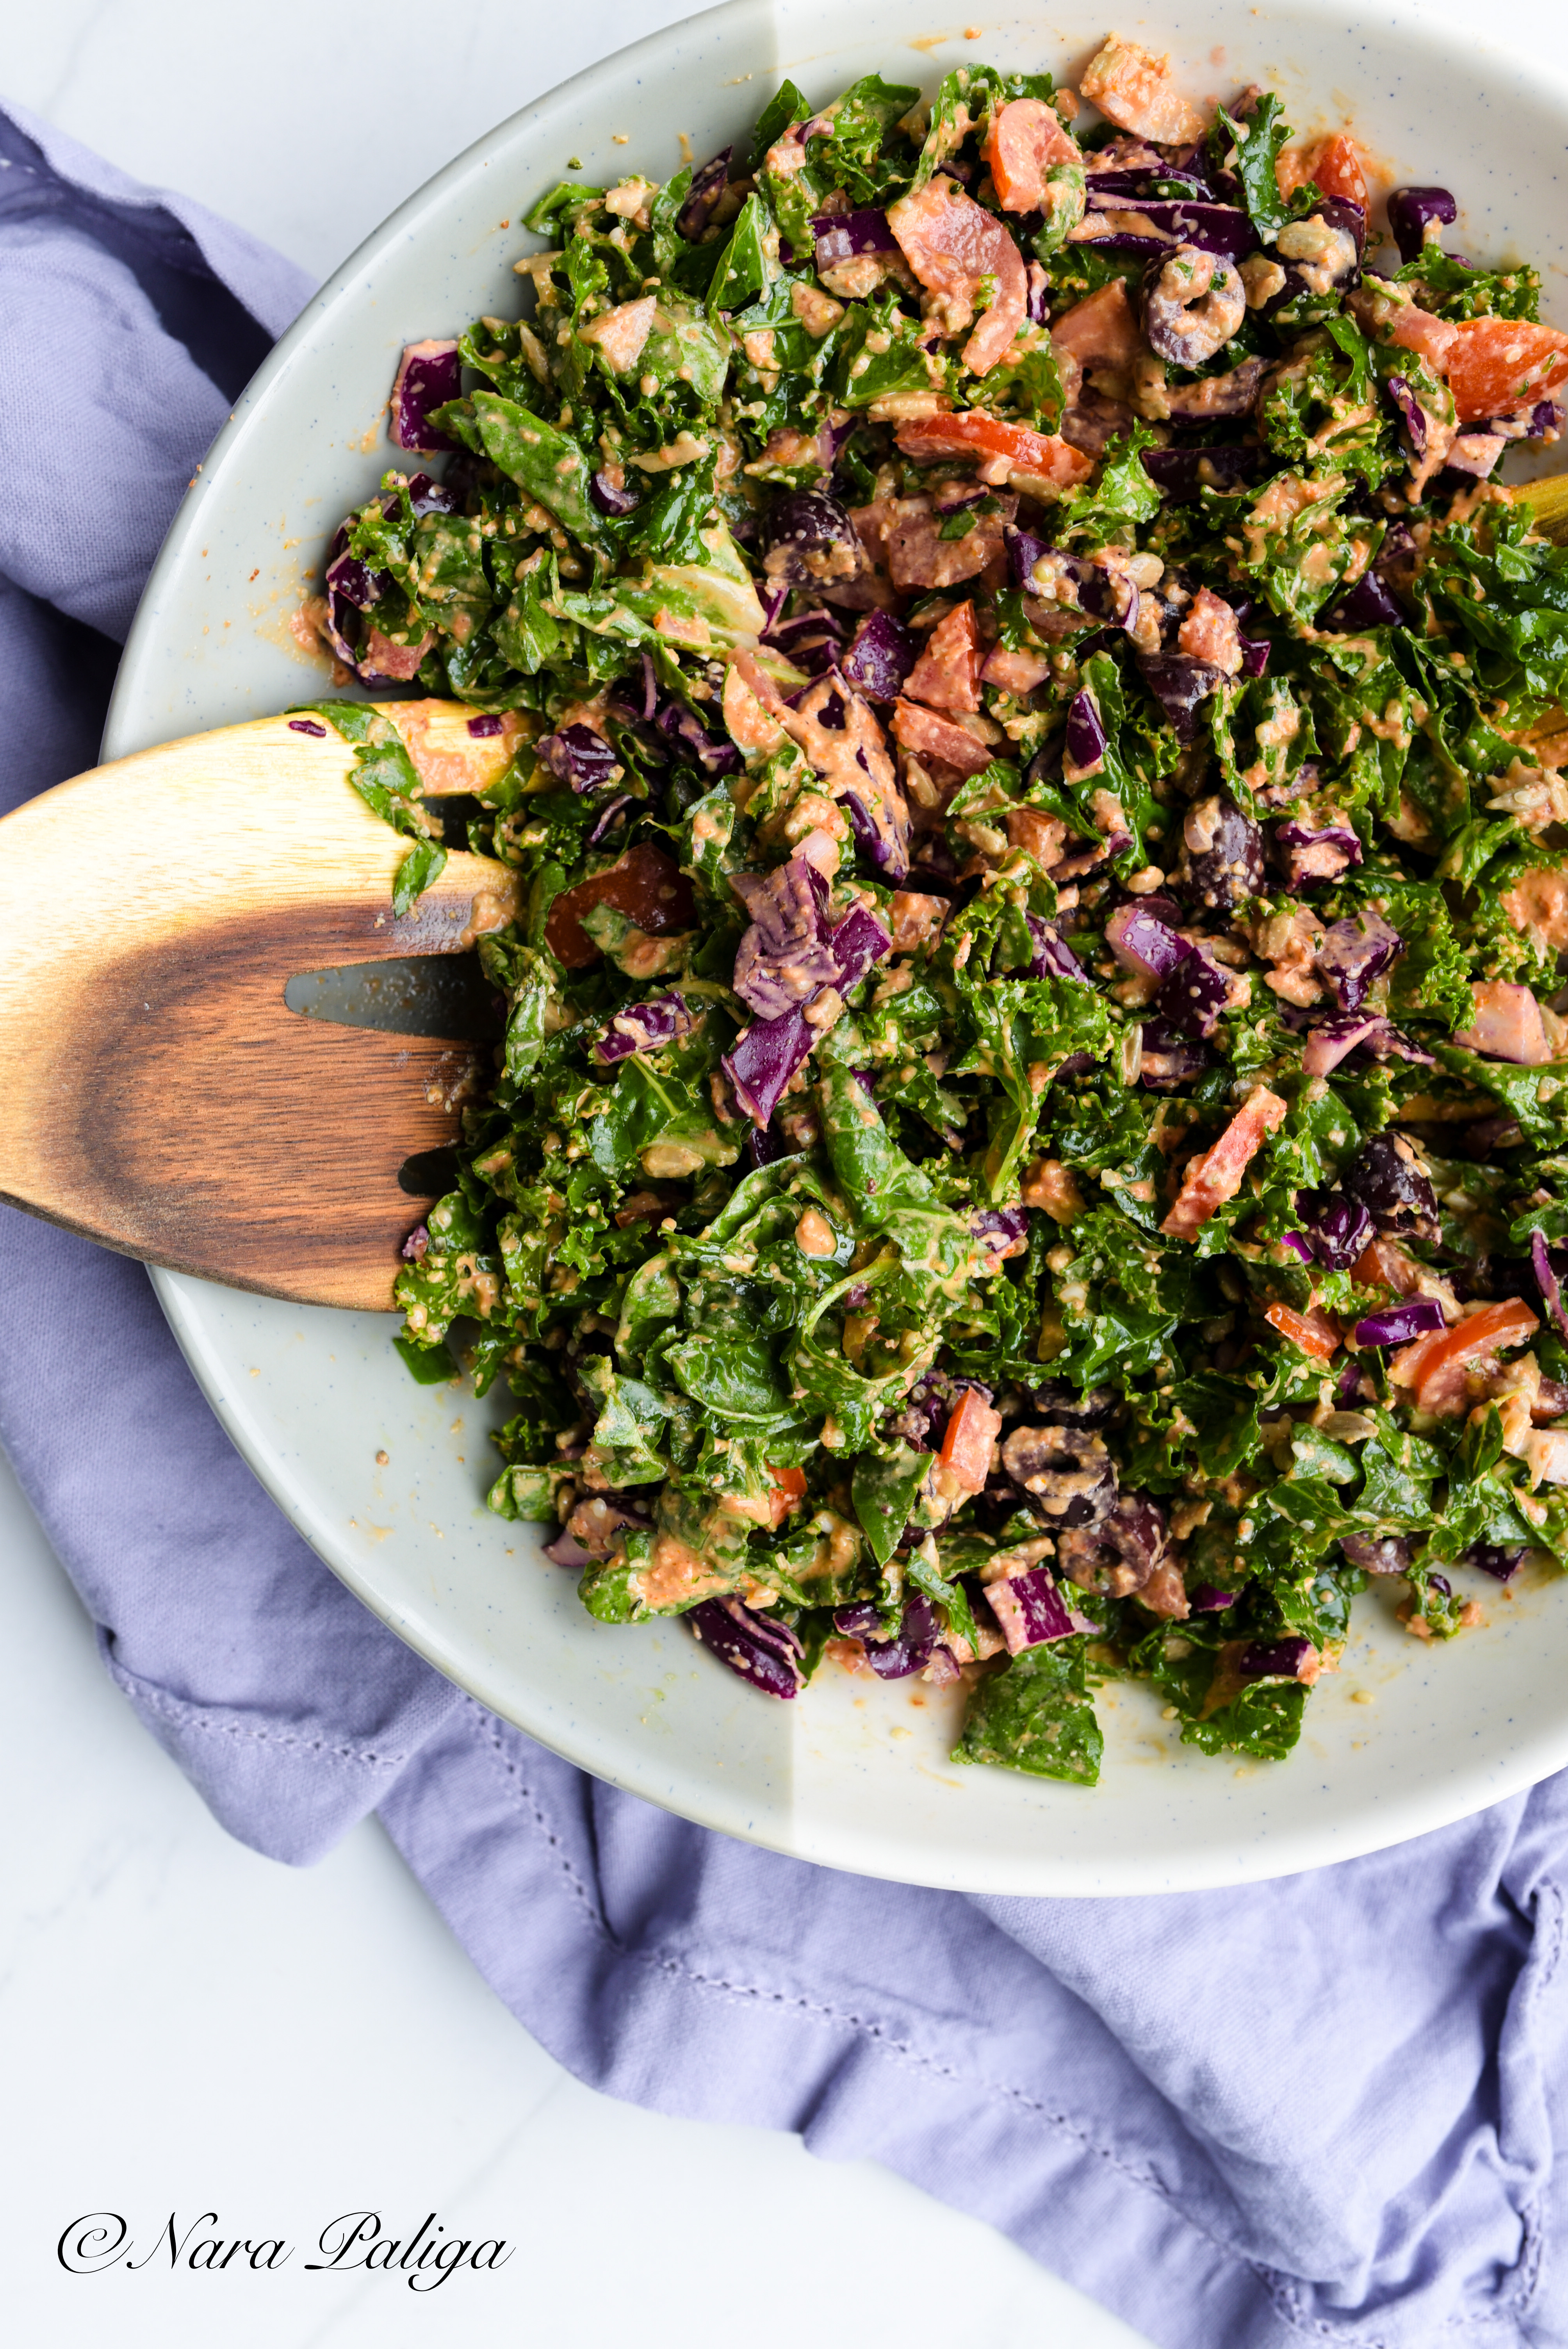 CRUNCHY KALE AND CABBAGE SALAD